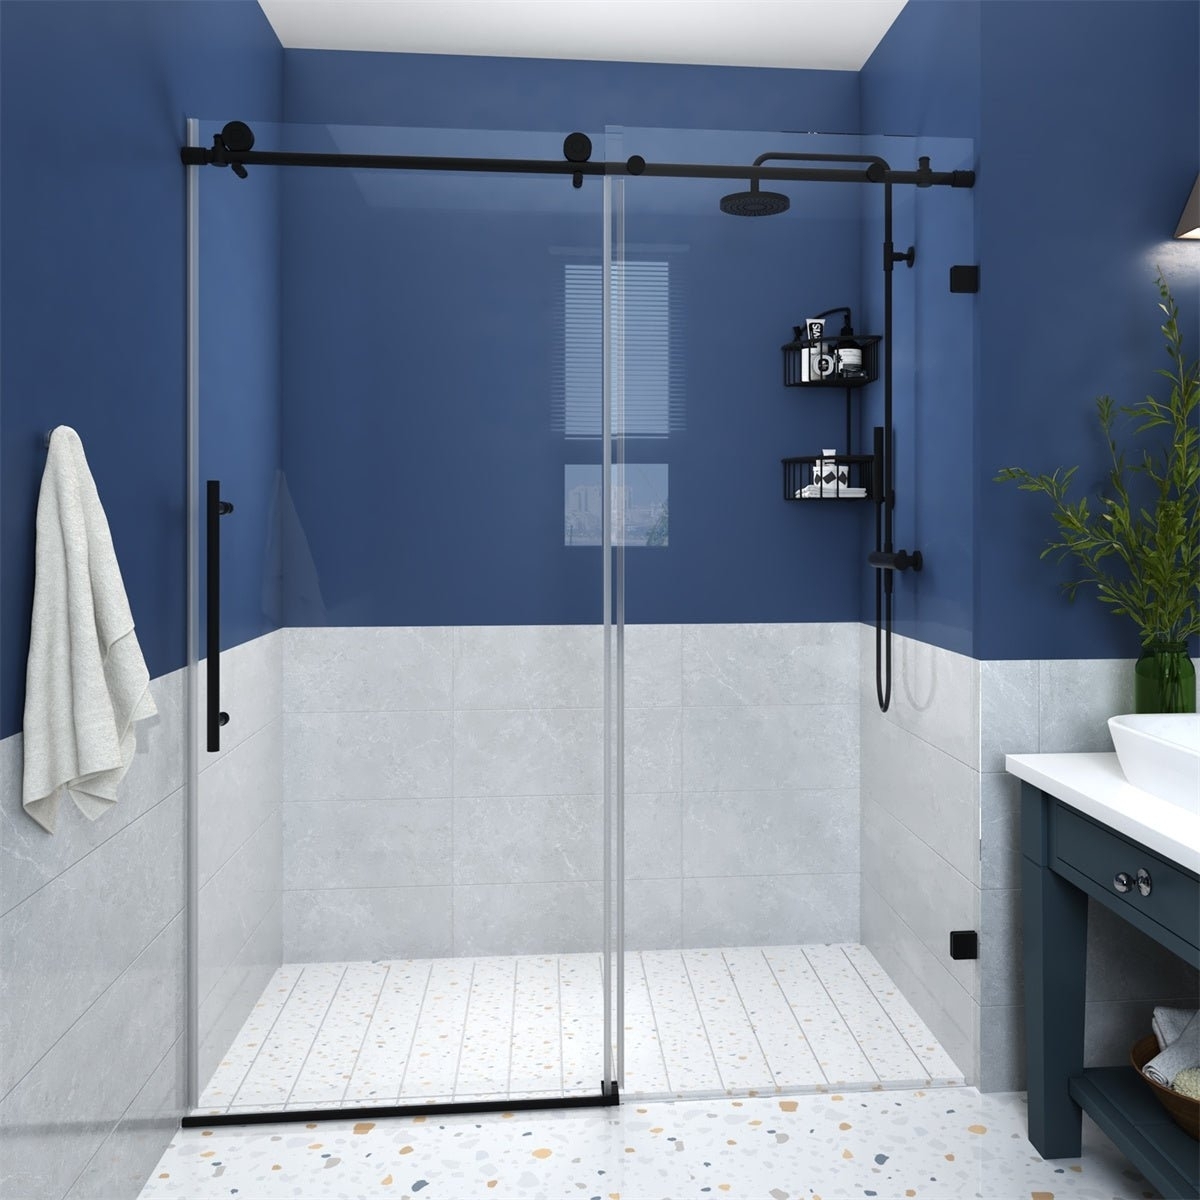 Glide 56-60 In. W X 74 In. H Frameless Tall Shower Door Sliding Walk-in Shower Design With 0.3 In.thick Clear Glass